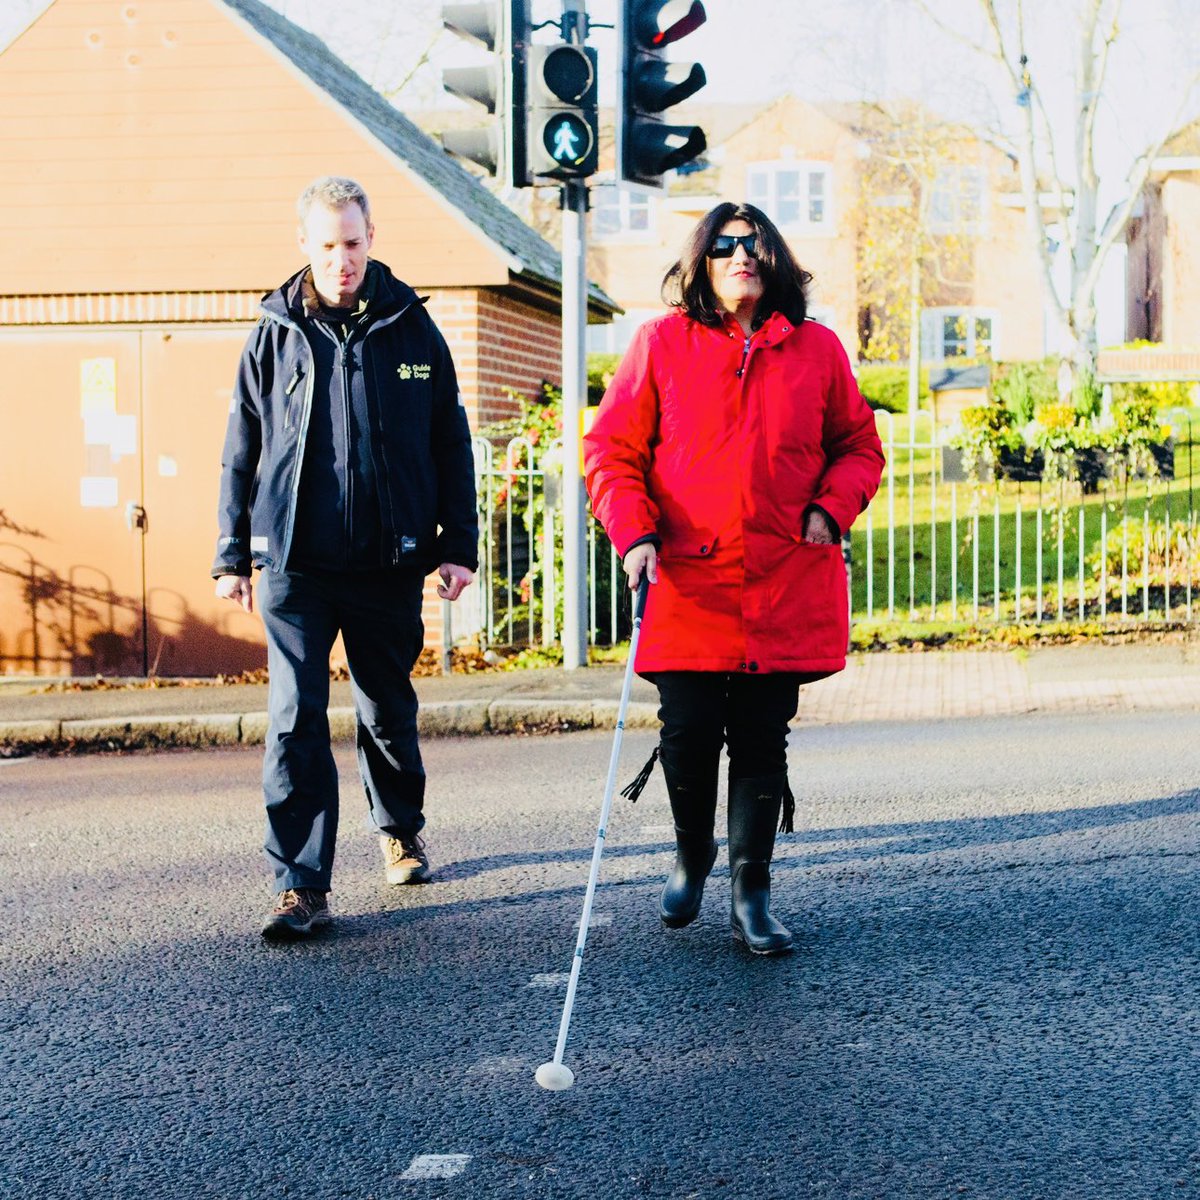 Today is International Guide Dog Day and we want to highlight the remarkable work that @guidedogsuk do for the visually impaired community.

#internationalguidedogday #guidedogs #visualimpairment #visuallyimpaired